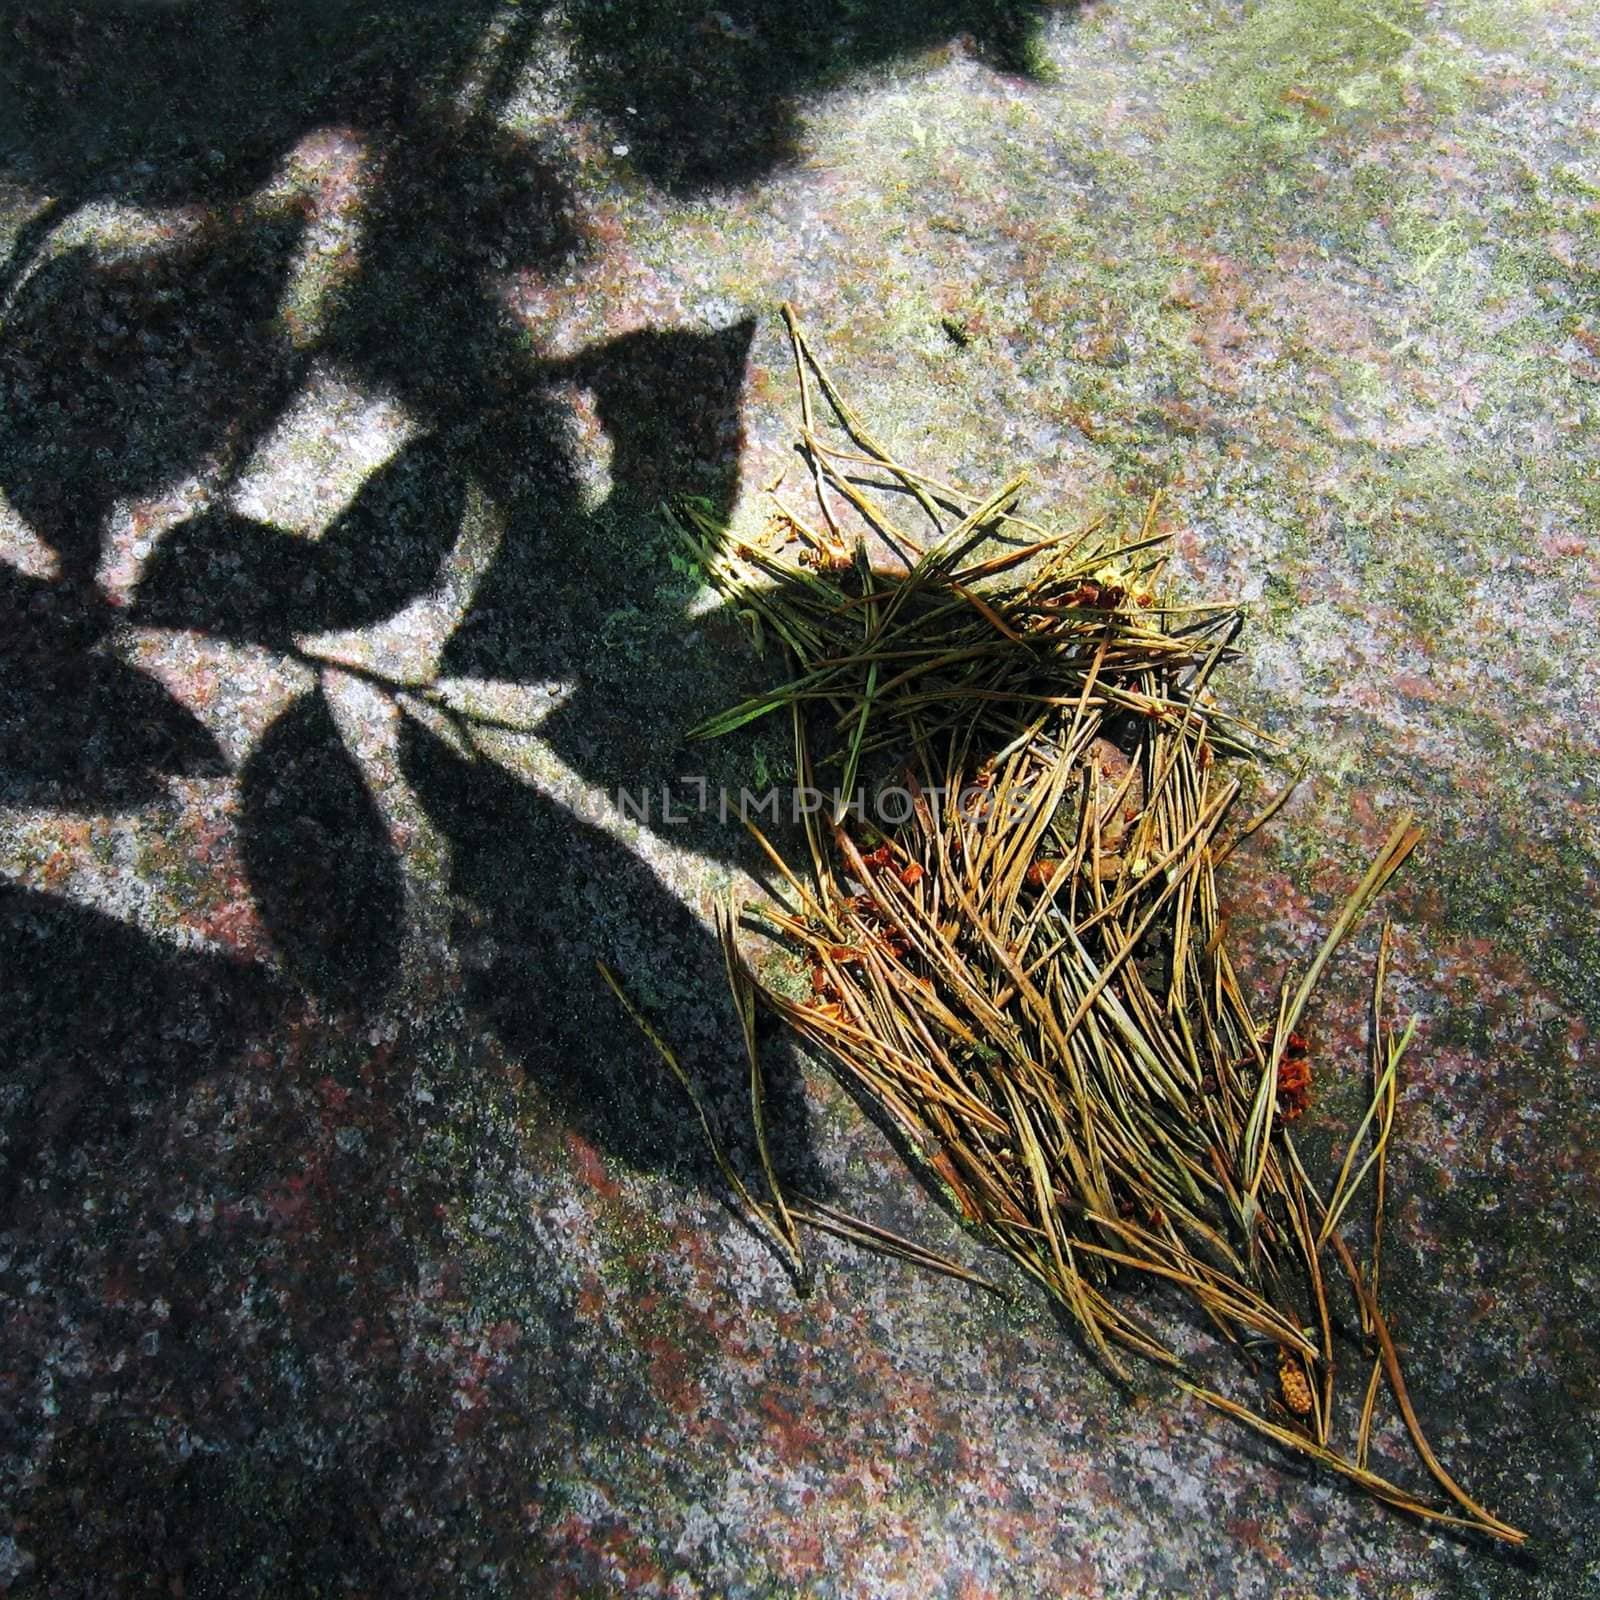 Dry pine needles and shade of live leaves on a granite boulder background